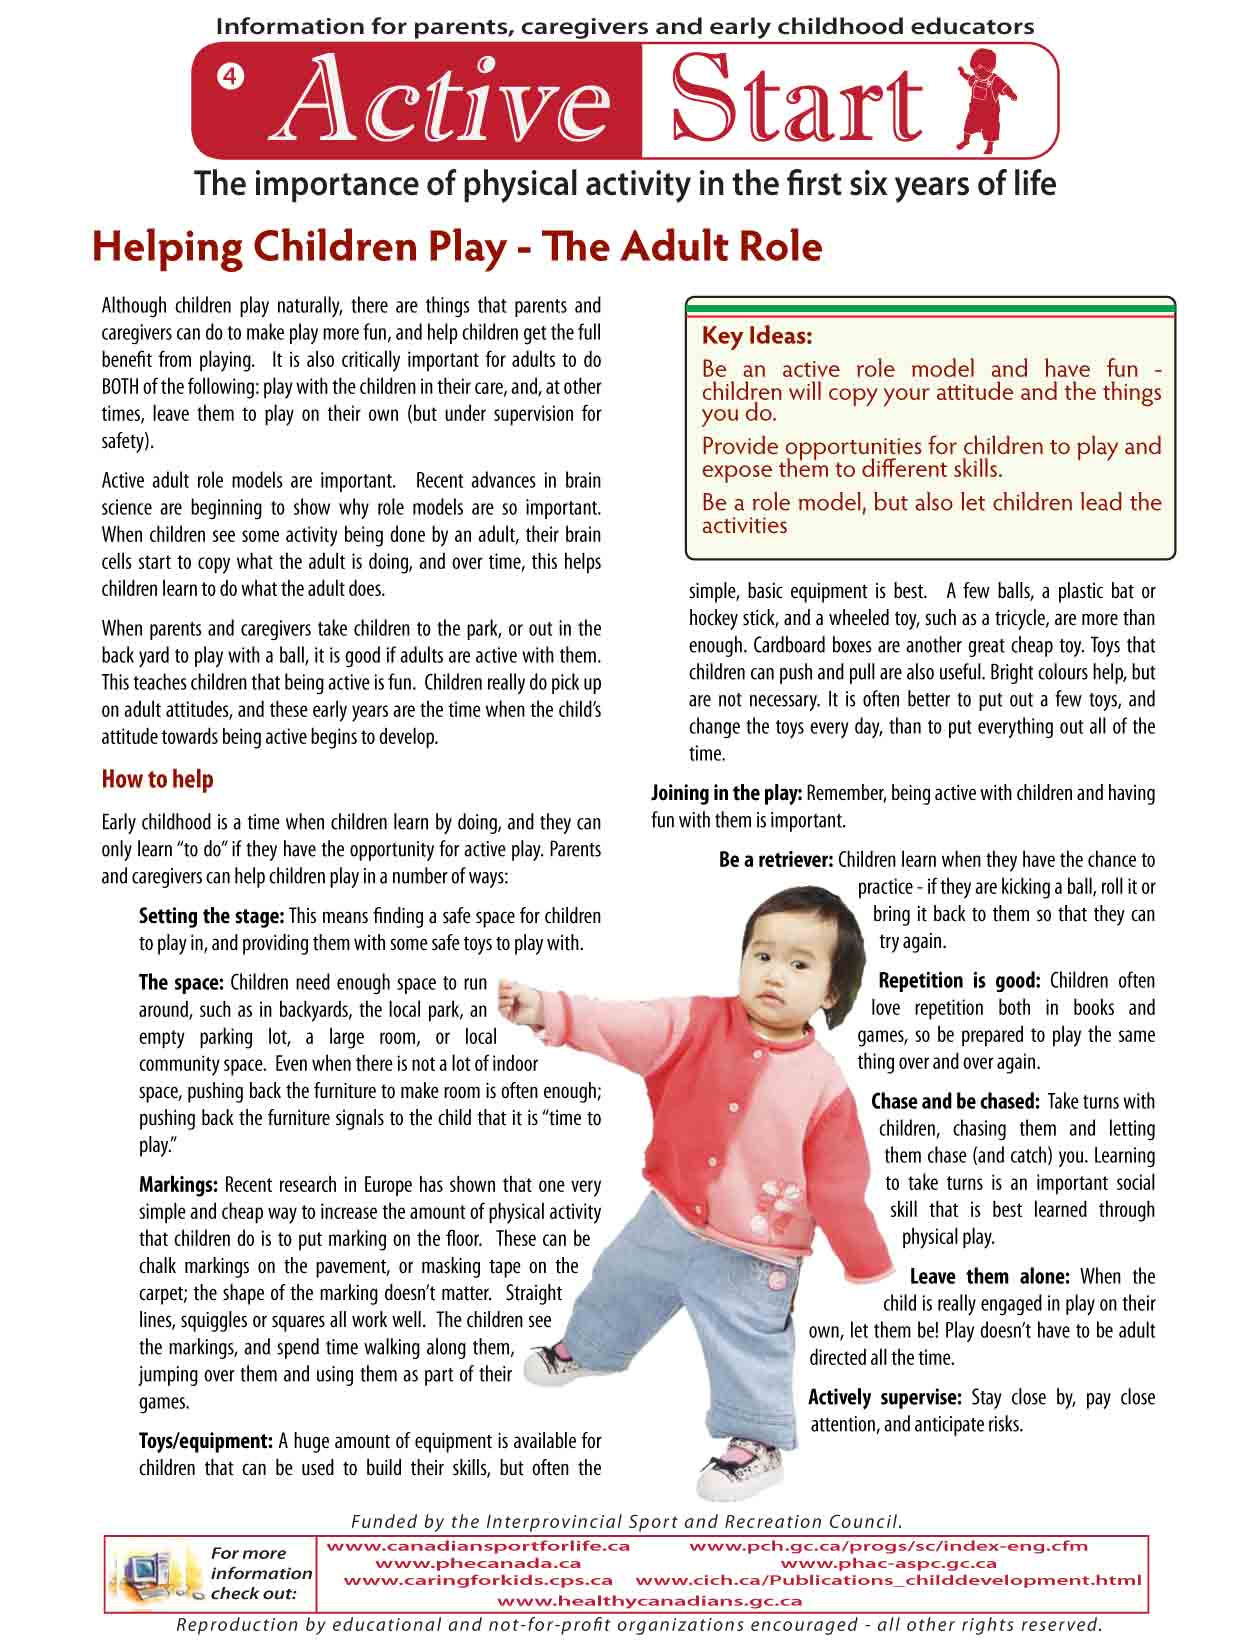 What is the Role of Adults in Children's Play?